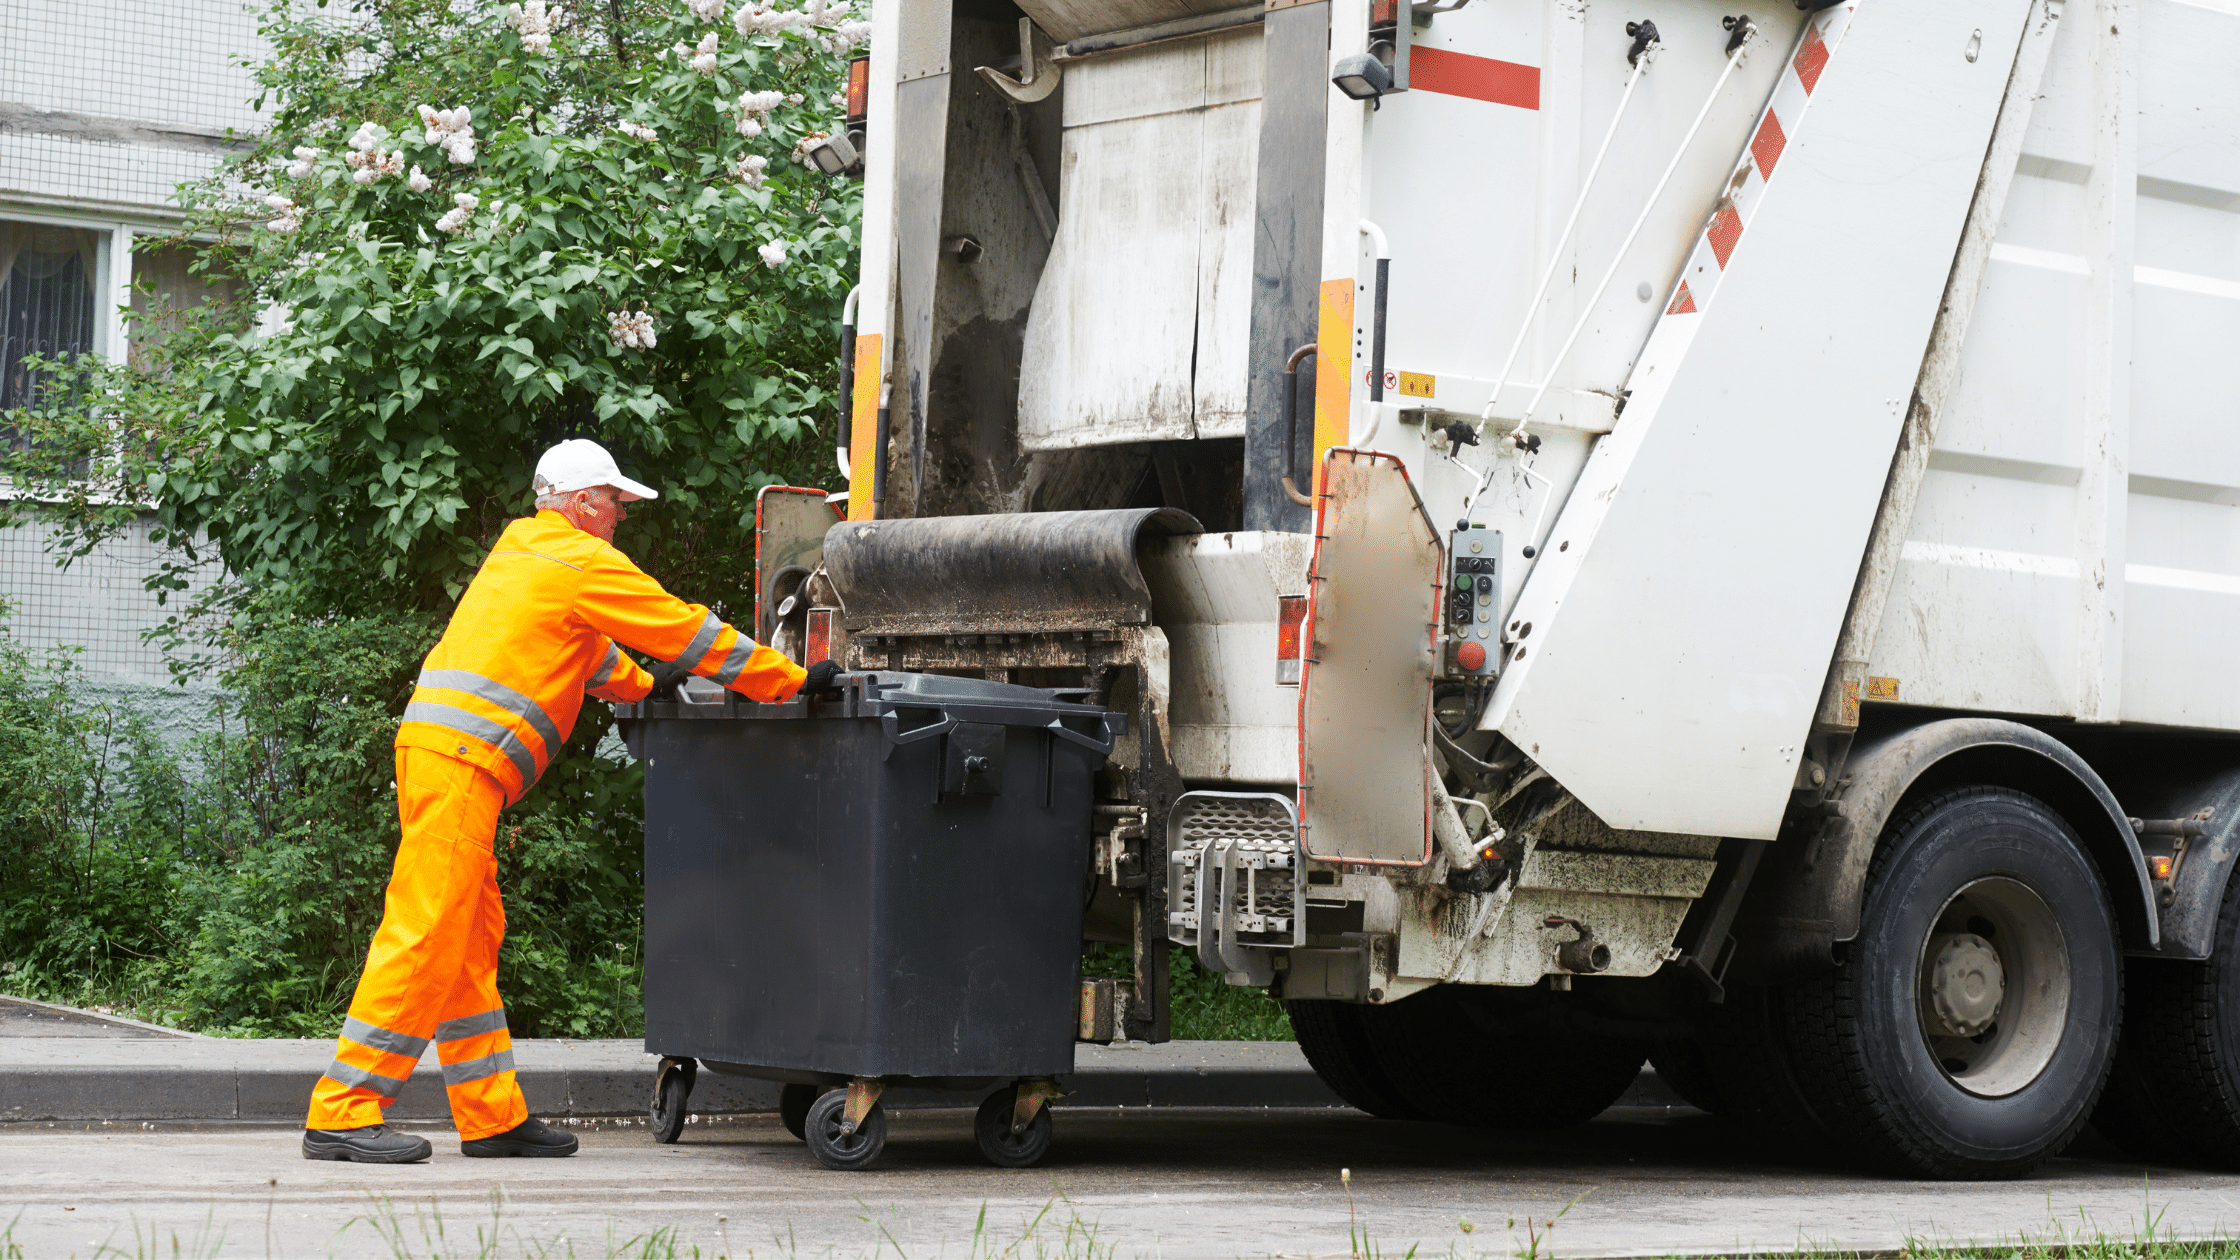 image showing dumpster about to be emptied into packer garbage truck